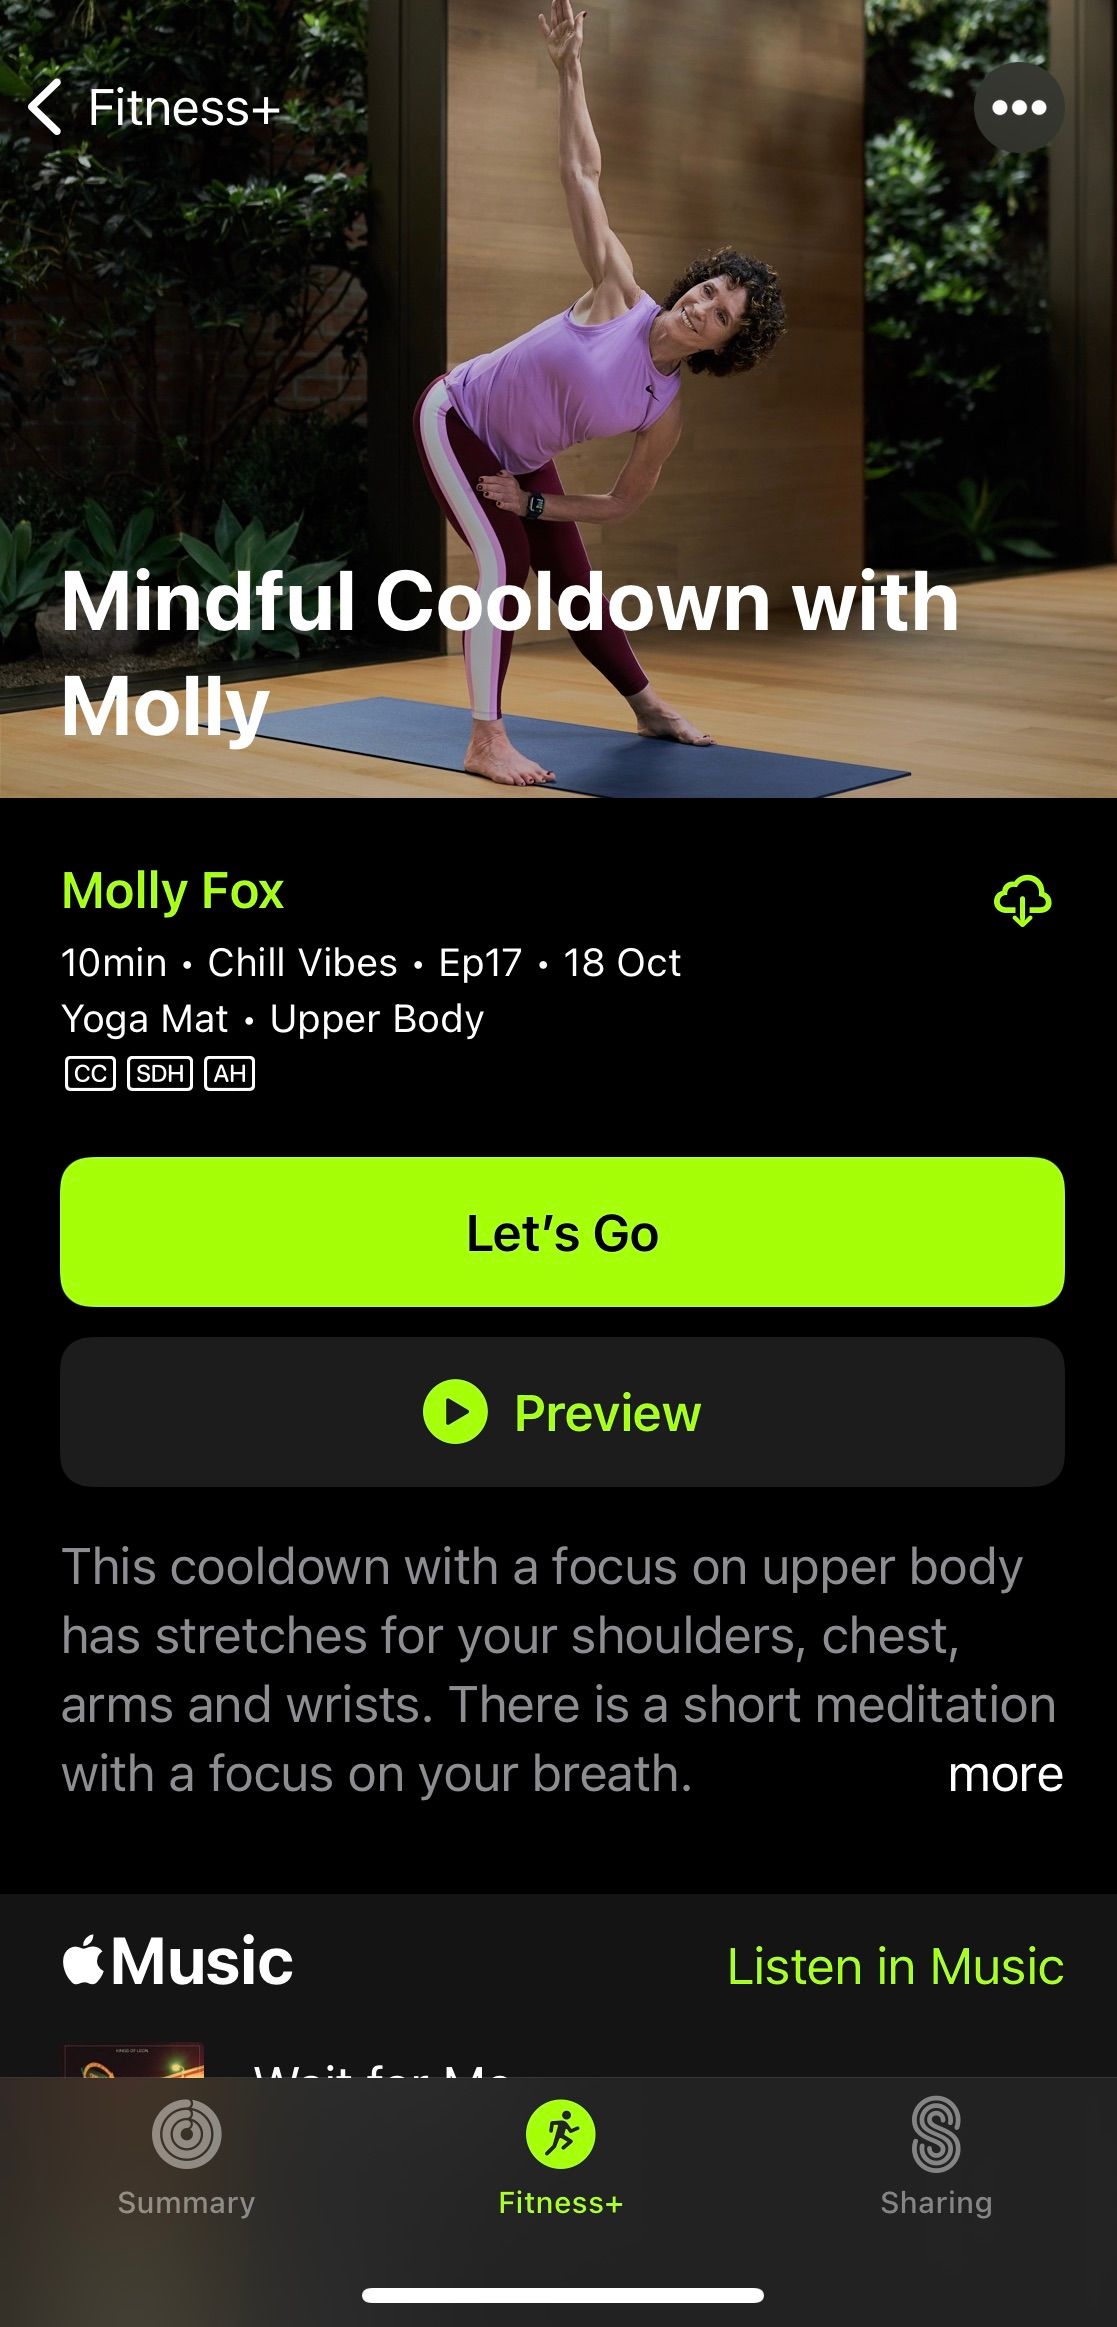 Screenshot from Apple Fitness+ app showing a mindful cooldown workout